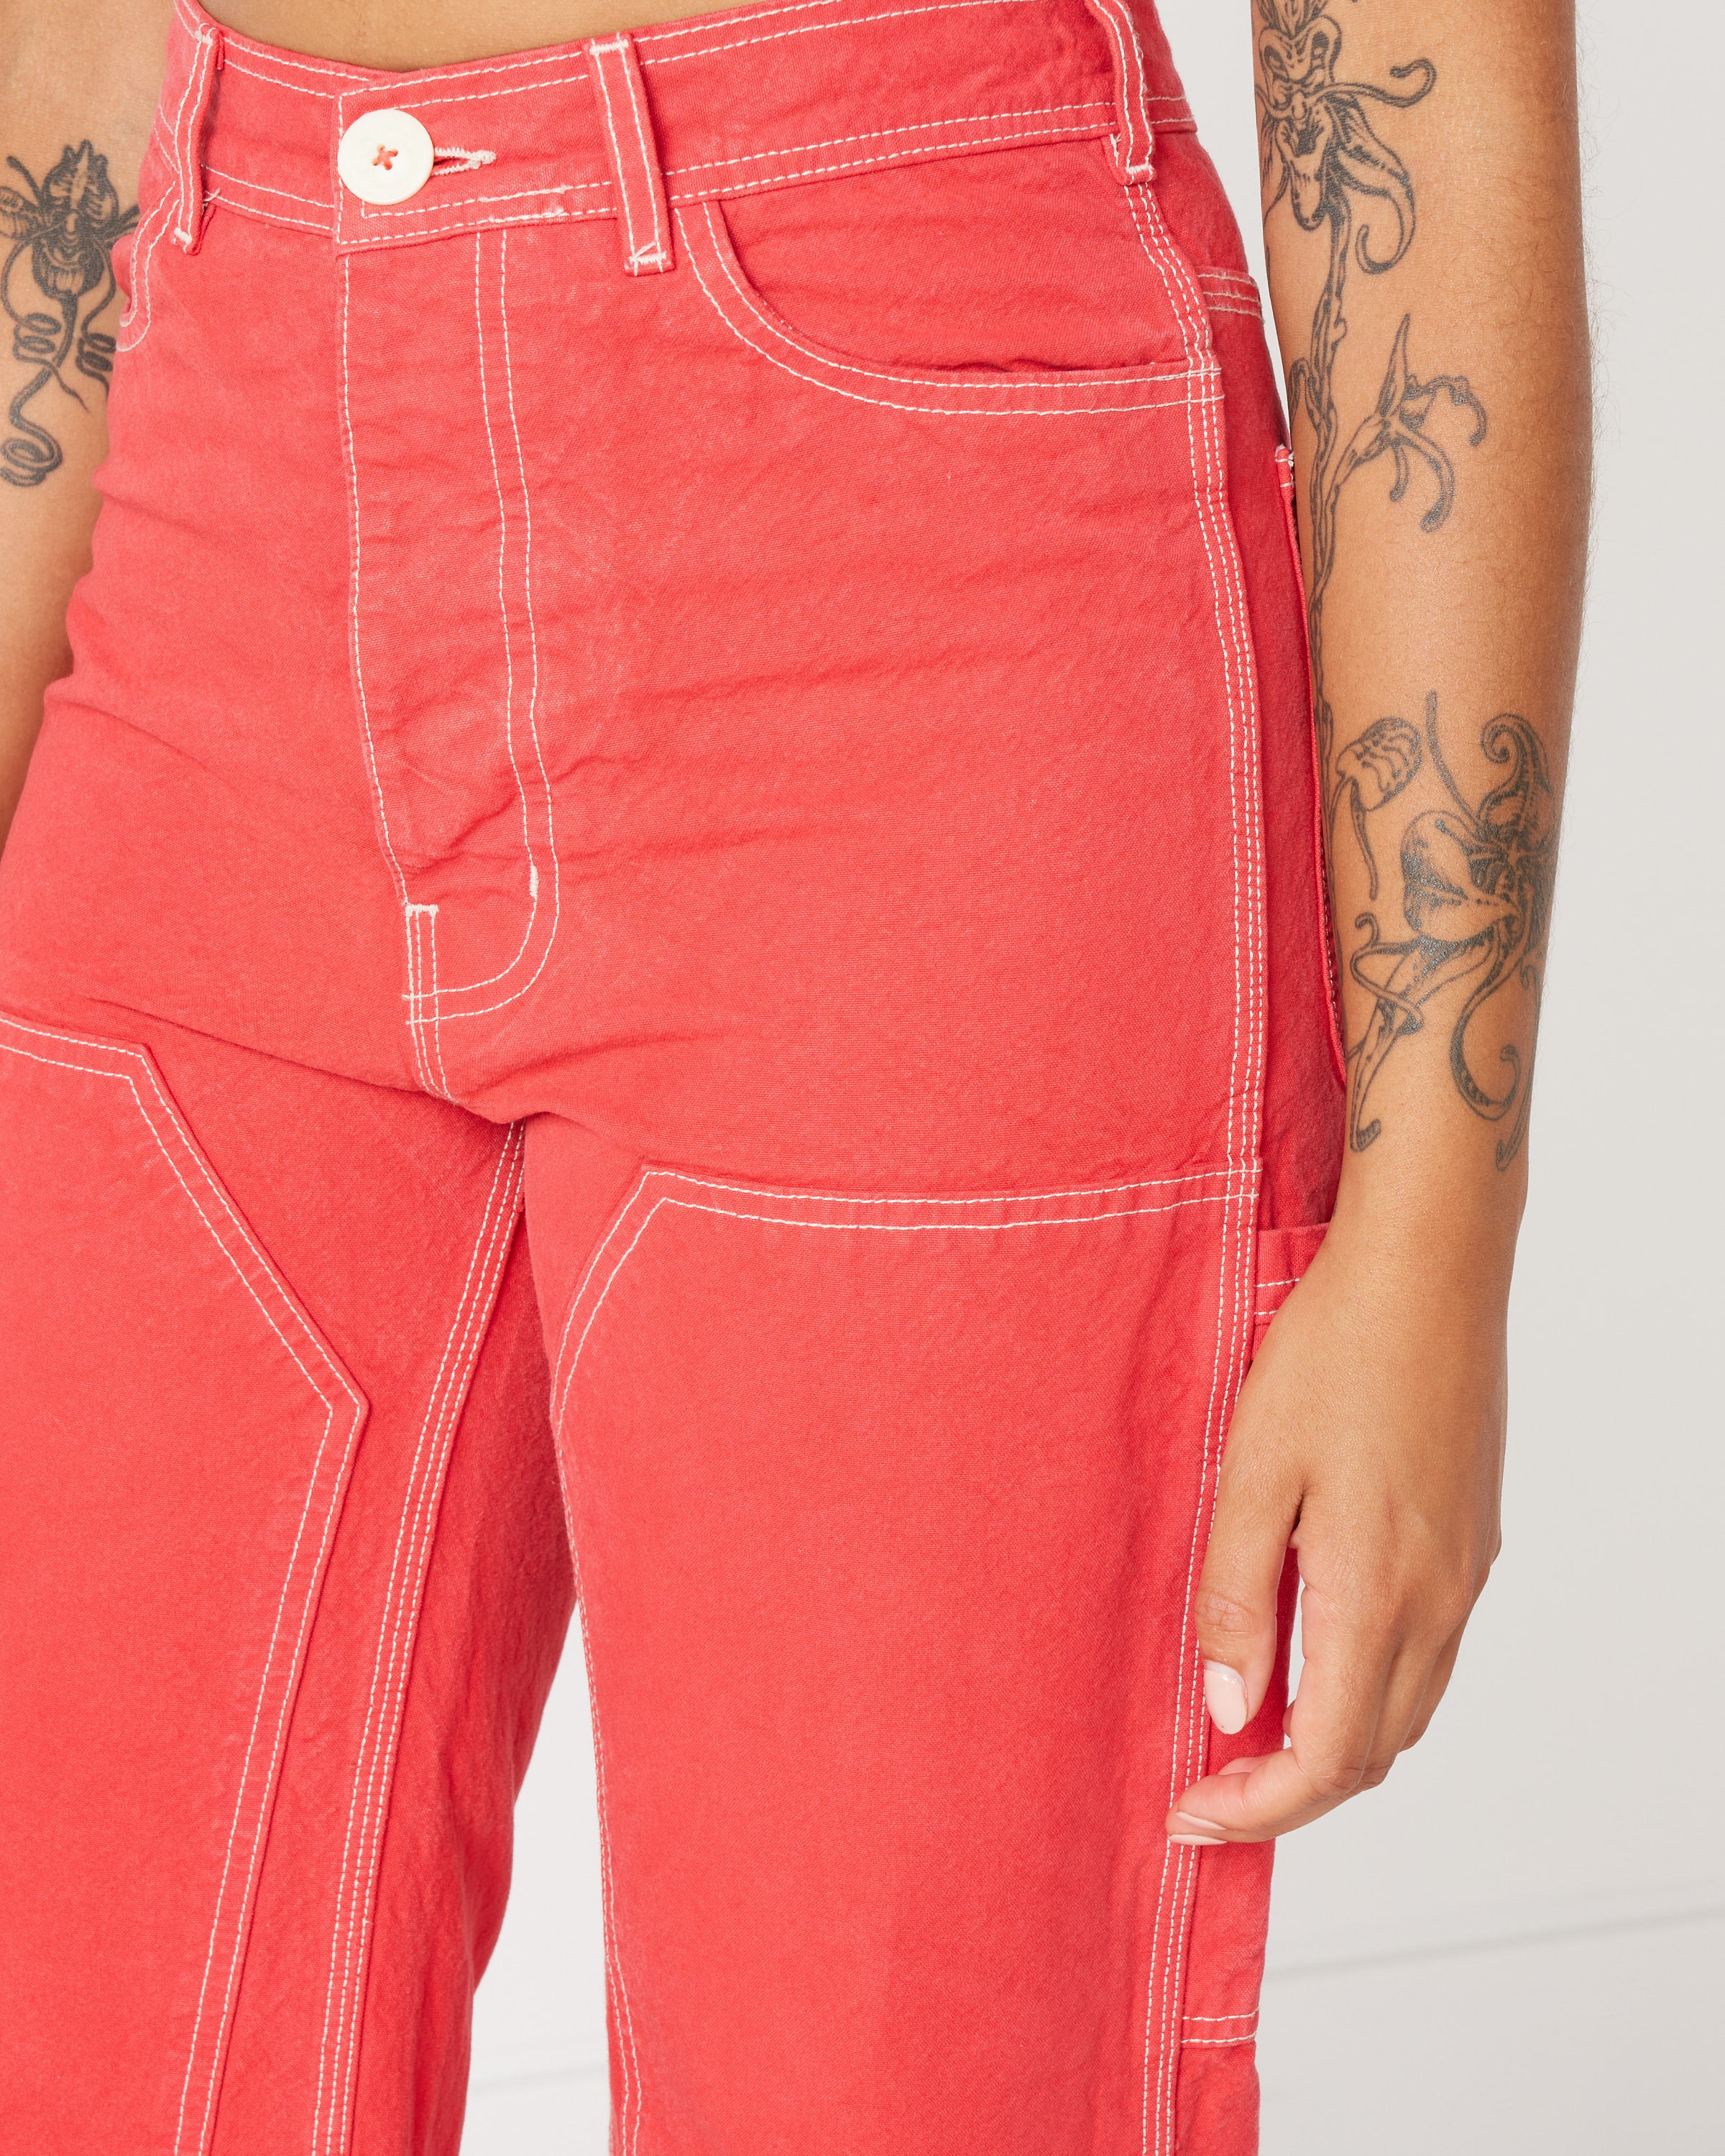 Deal of the Day: Urban's Sailor Pant